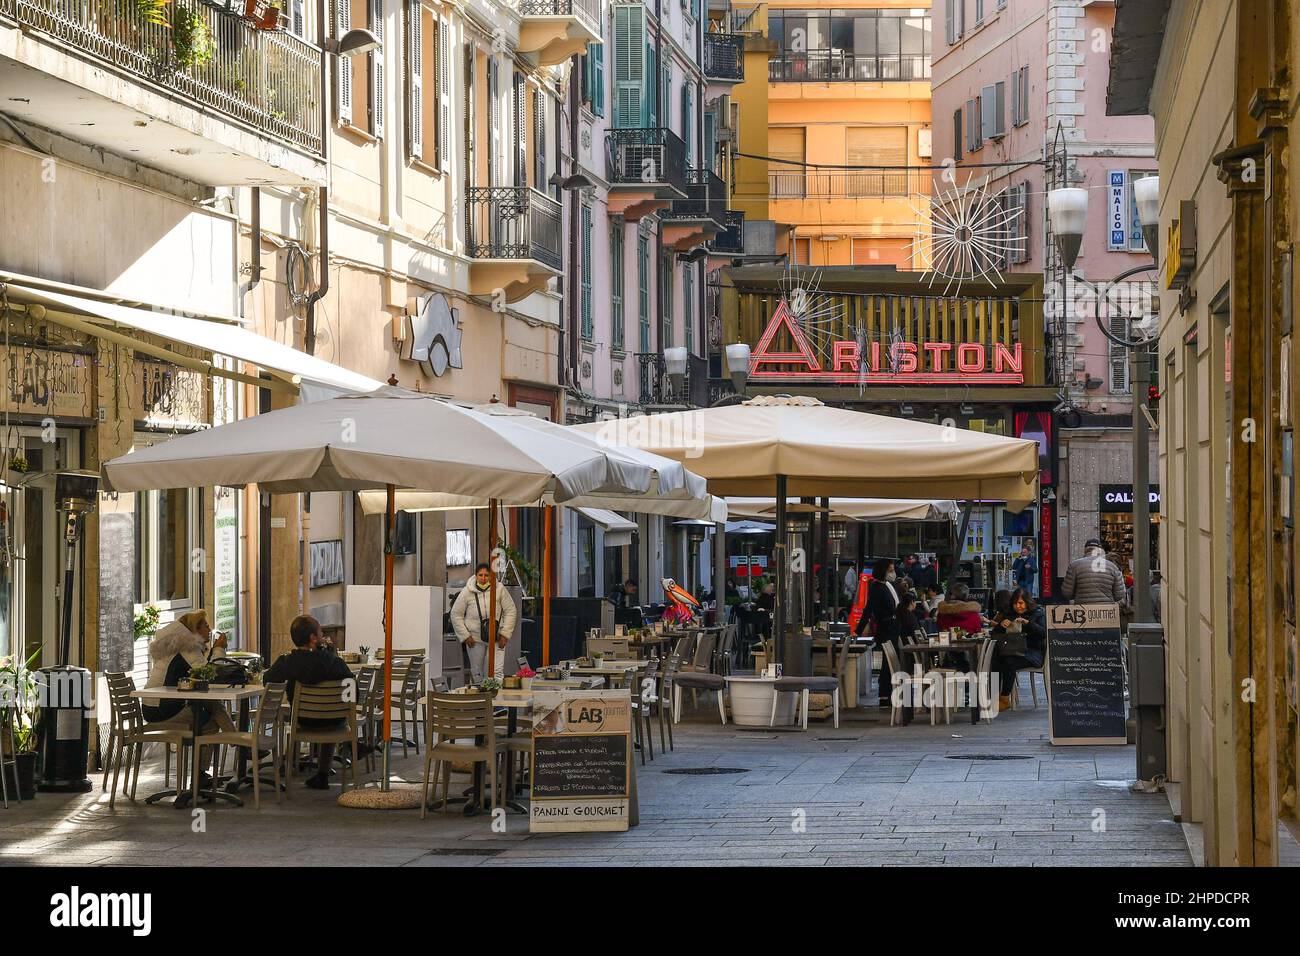 Street view of the city center with sidewalk cafe and the Ariston Theatre, seat of the Italian Song Festival, Sanremo, Imperia, Liguria, Italy Stock Photo